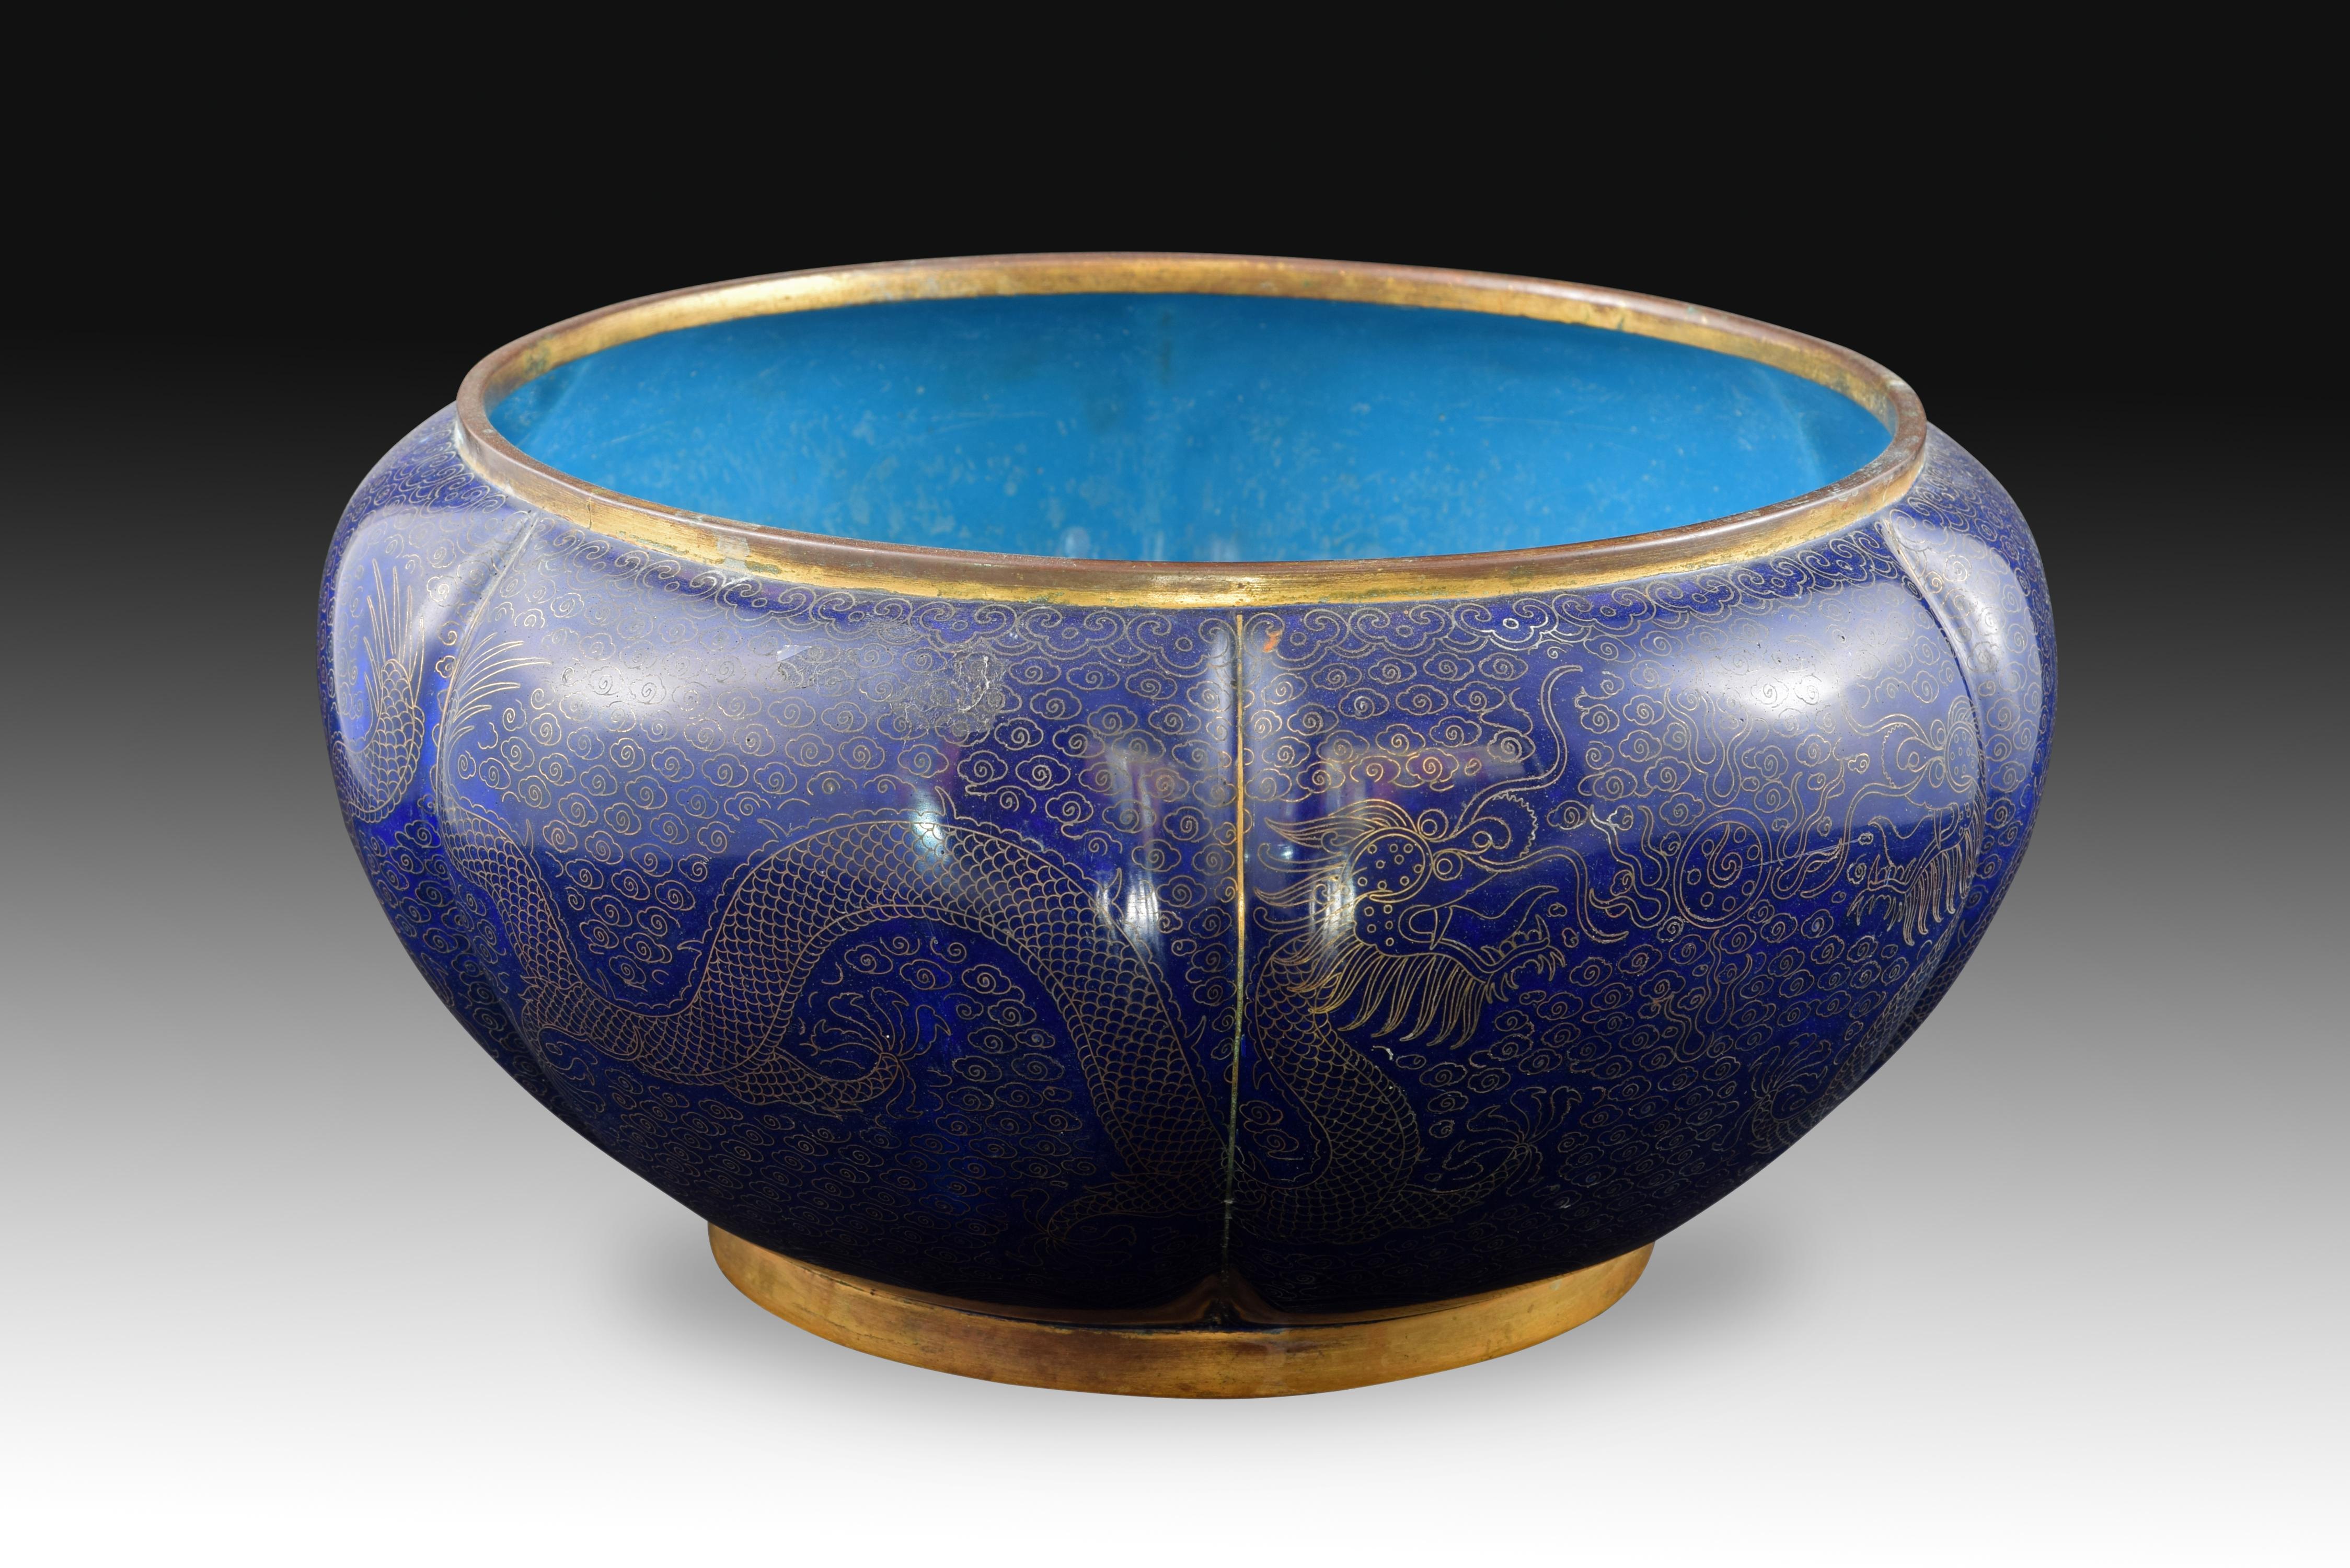 Lobulated, supported by a small flange, decorated on the body by the technique of cloisonne, in glazed blue enamel lapis lazuli, representing dragons, decoration associated with water. Interior enameled in turquoise blue, early 20th century
Size: